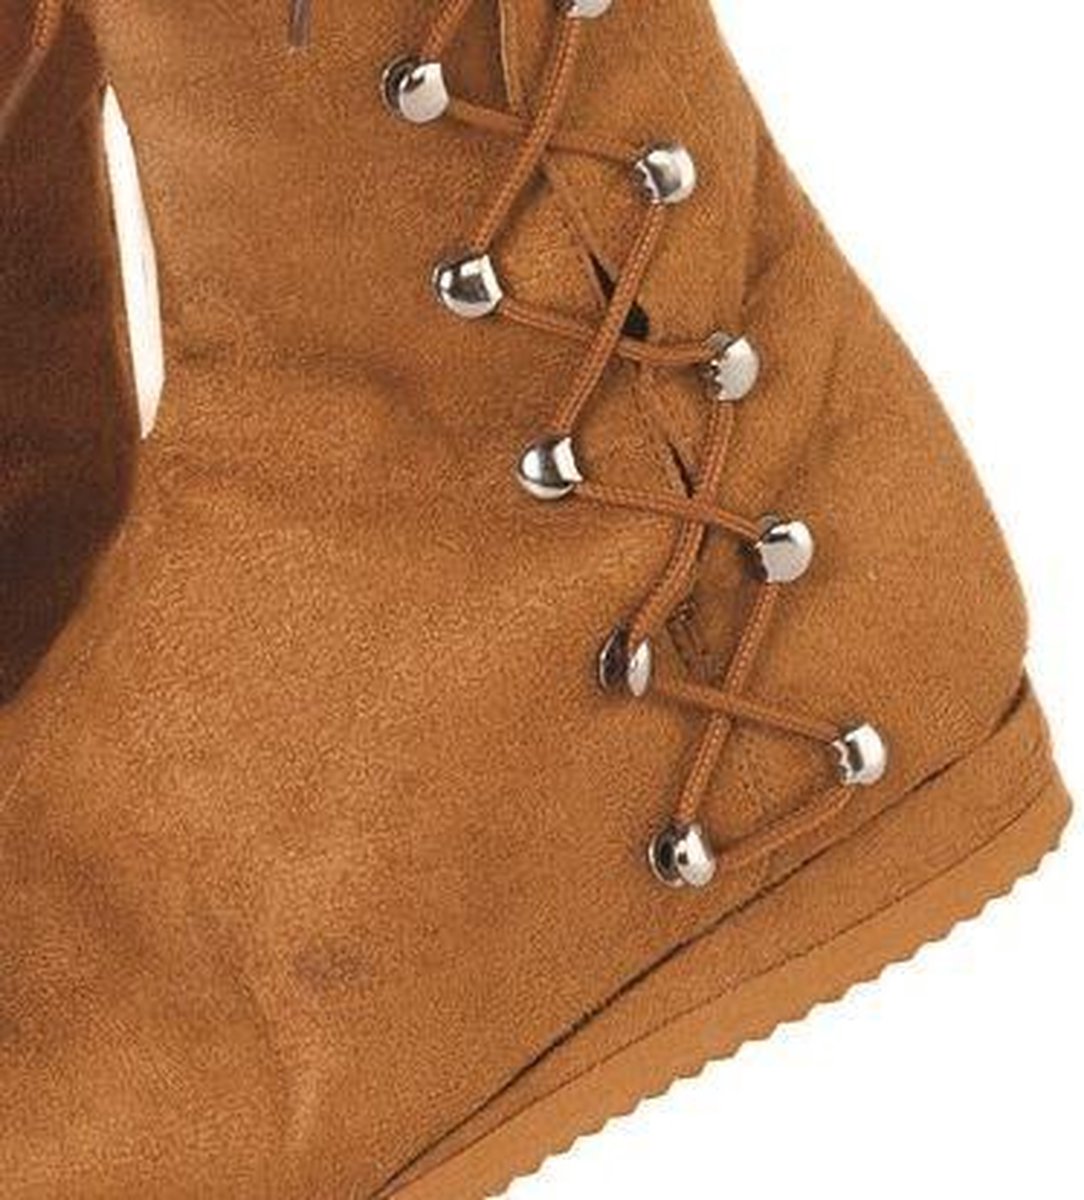 Bottes indiennes | bol